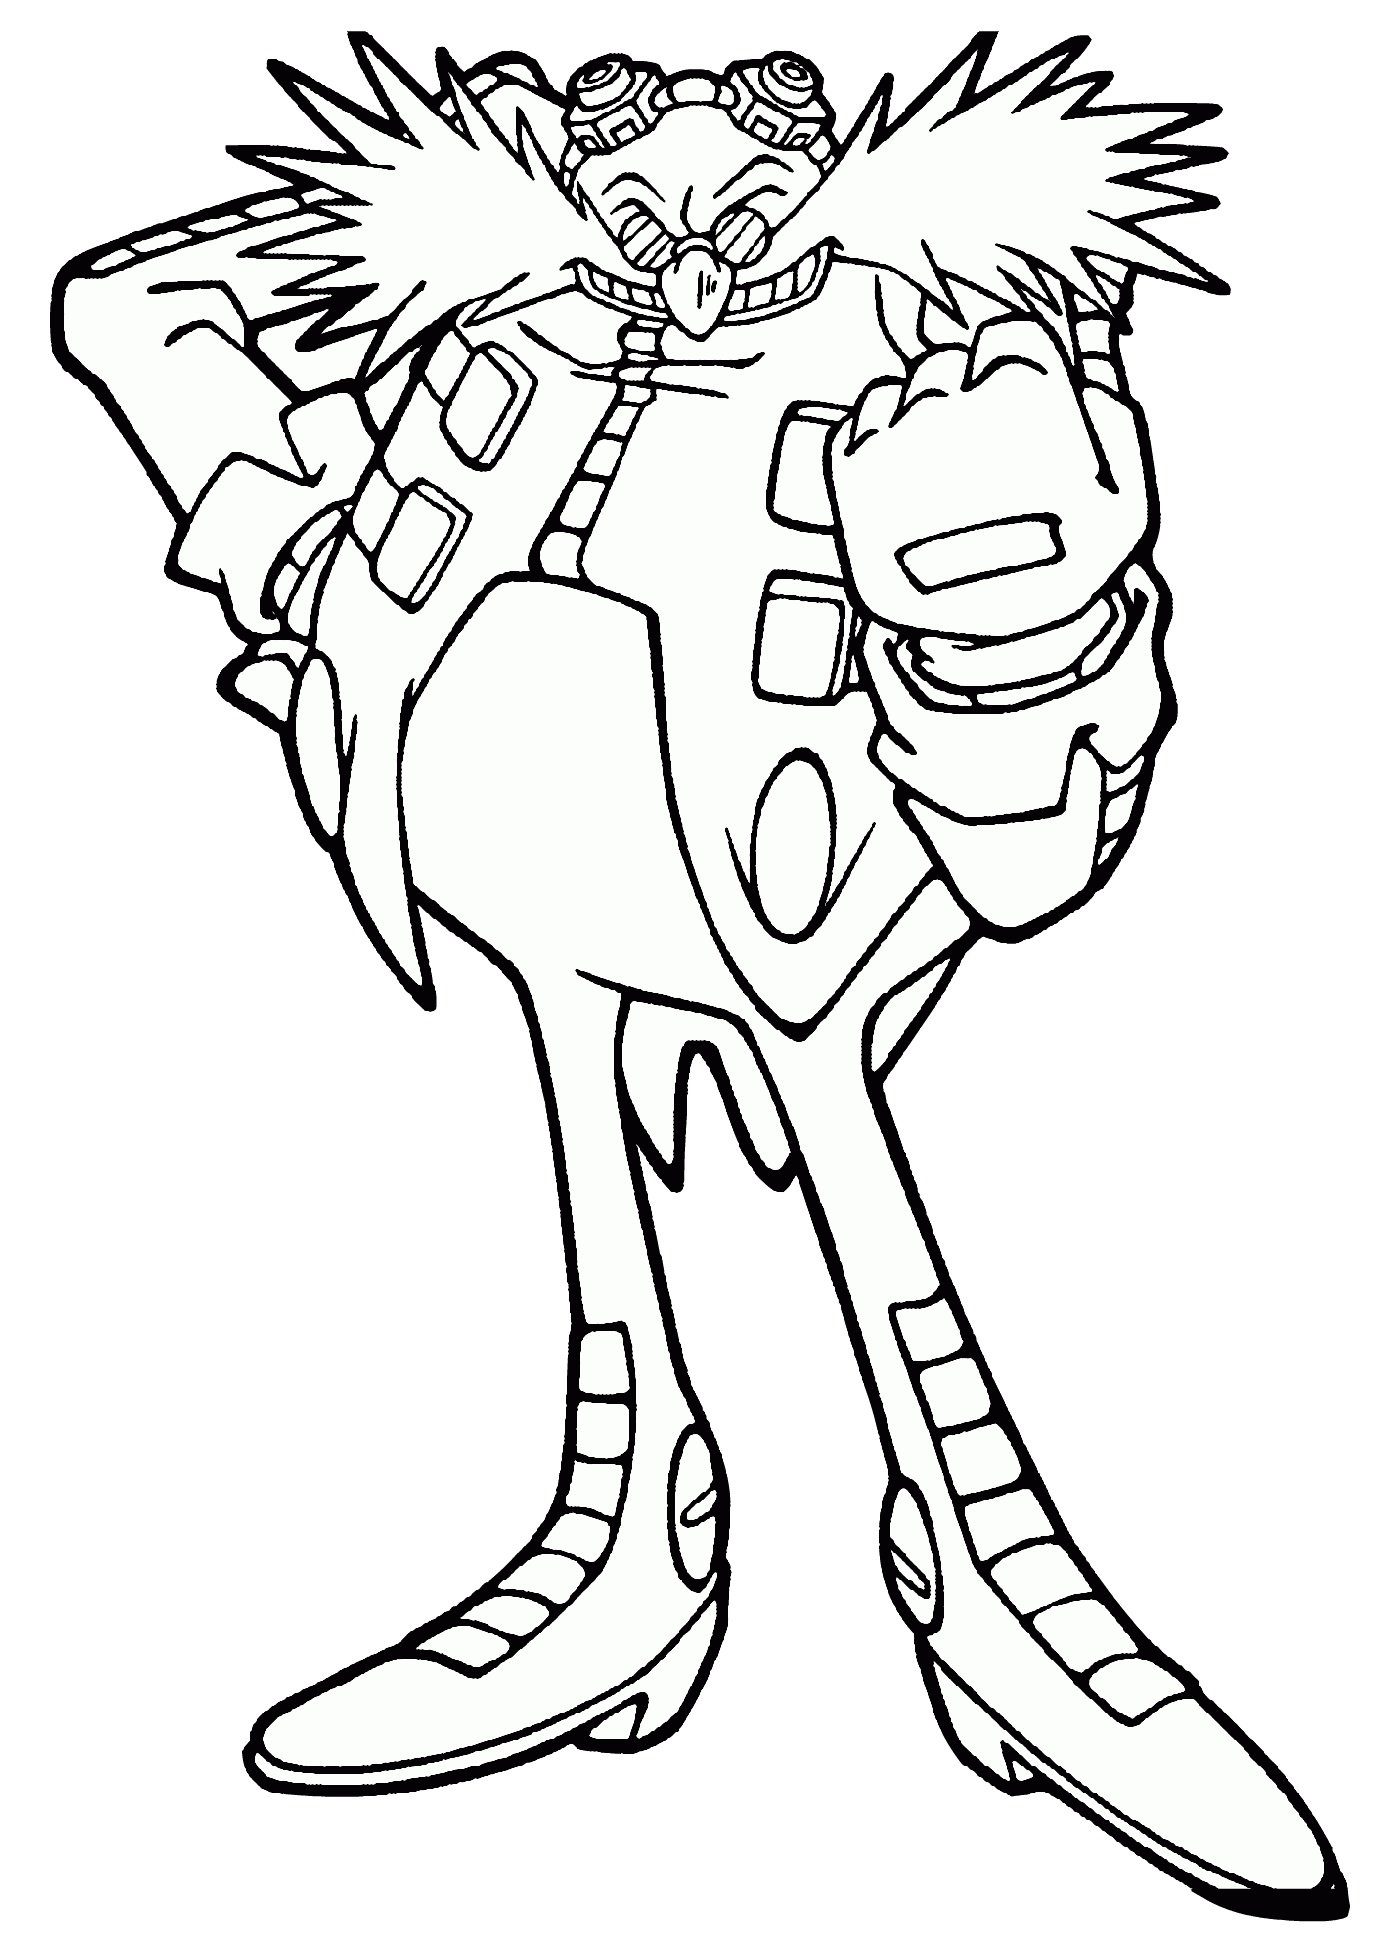 Sonic Coloring Pages Eggman - brengosfilmitali